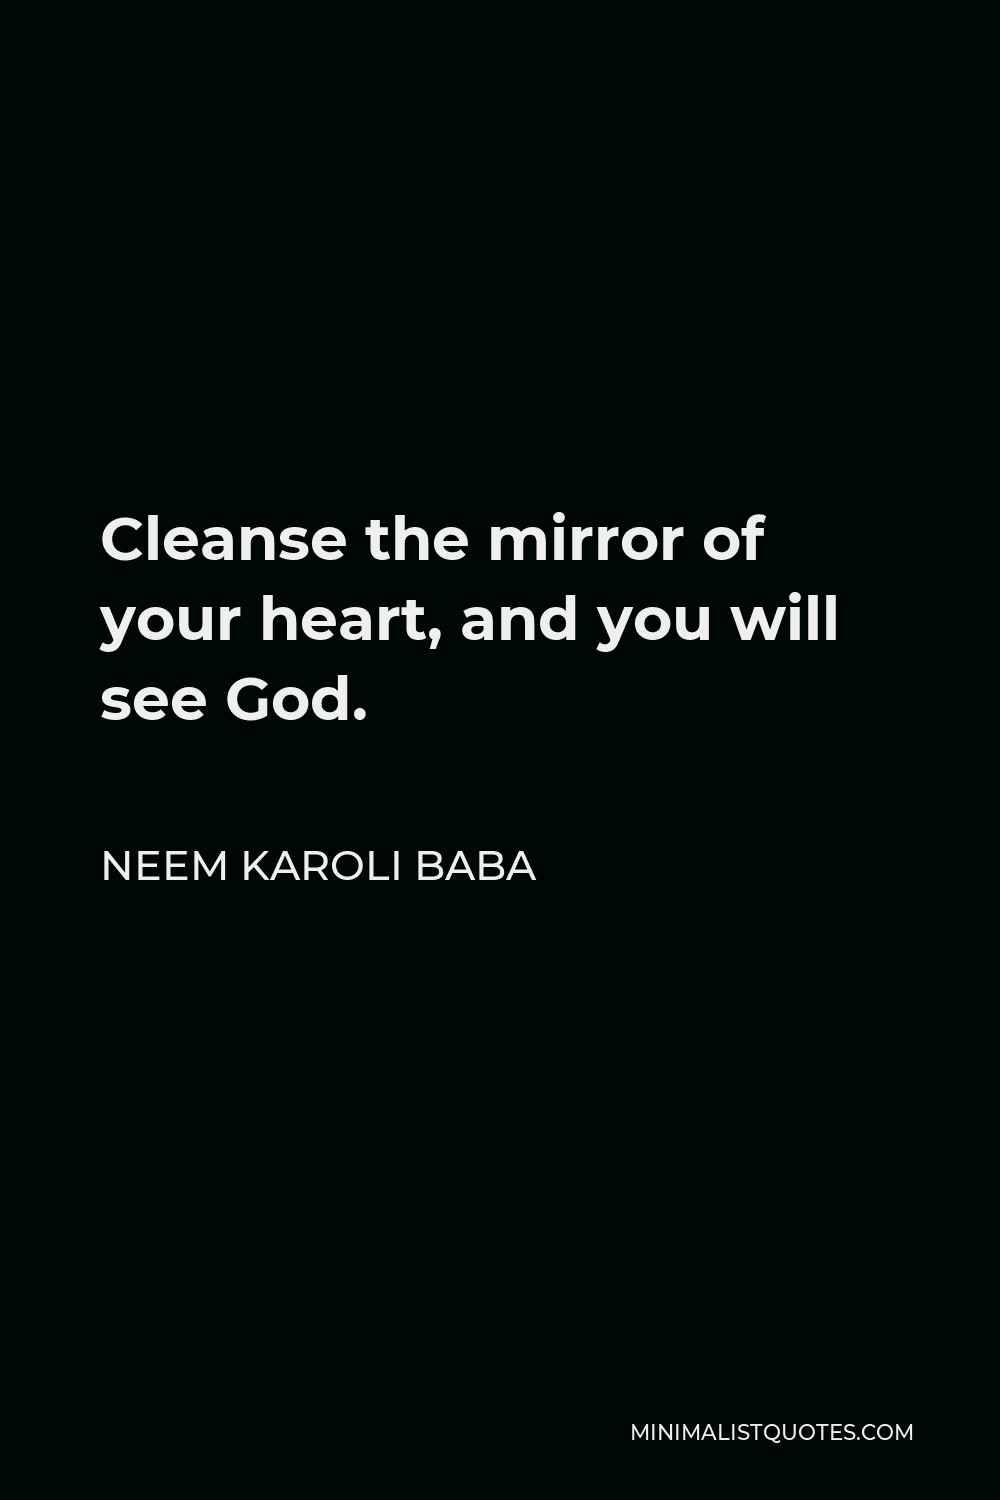 Neem Karoli Baba Quote - Cleanse the mirror of your heart, and you will see God.